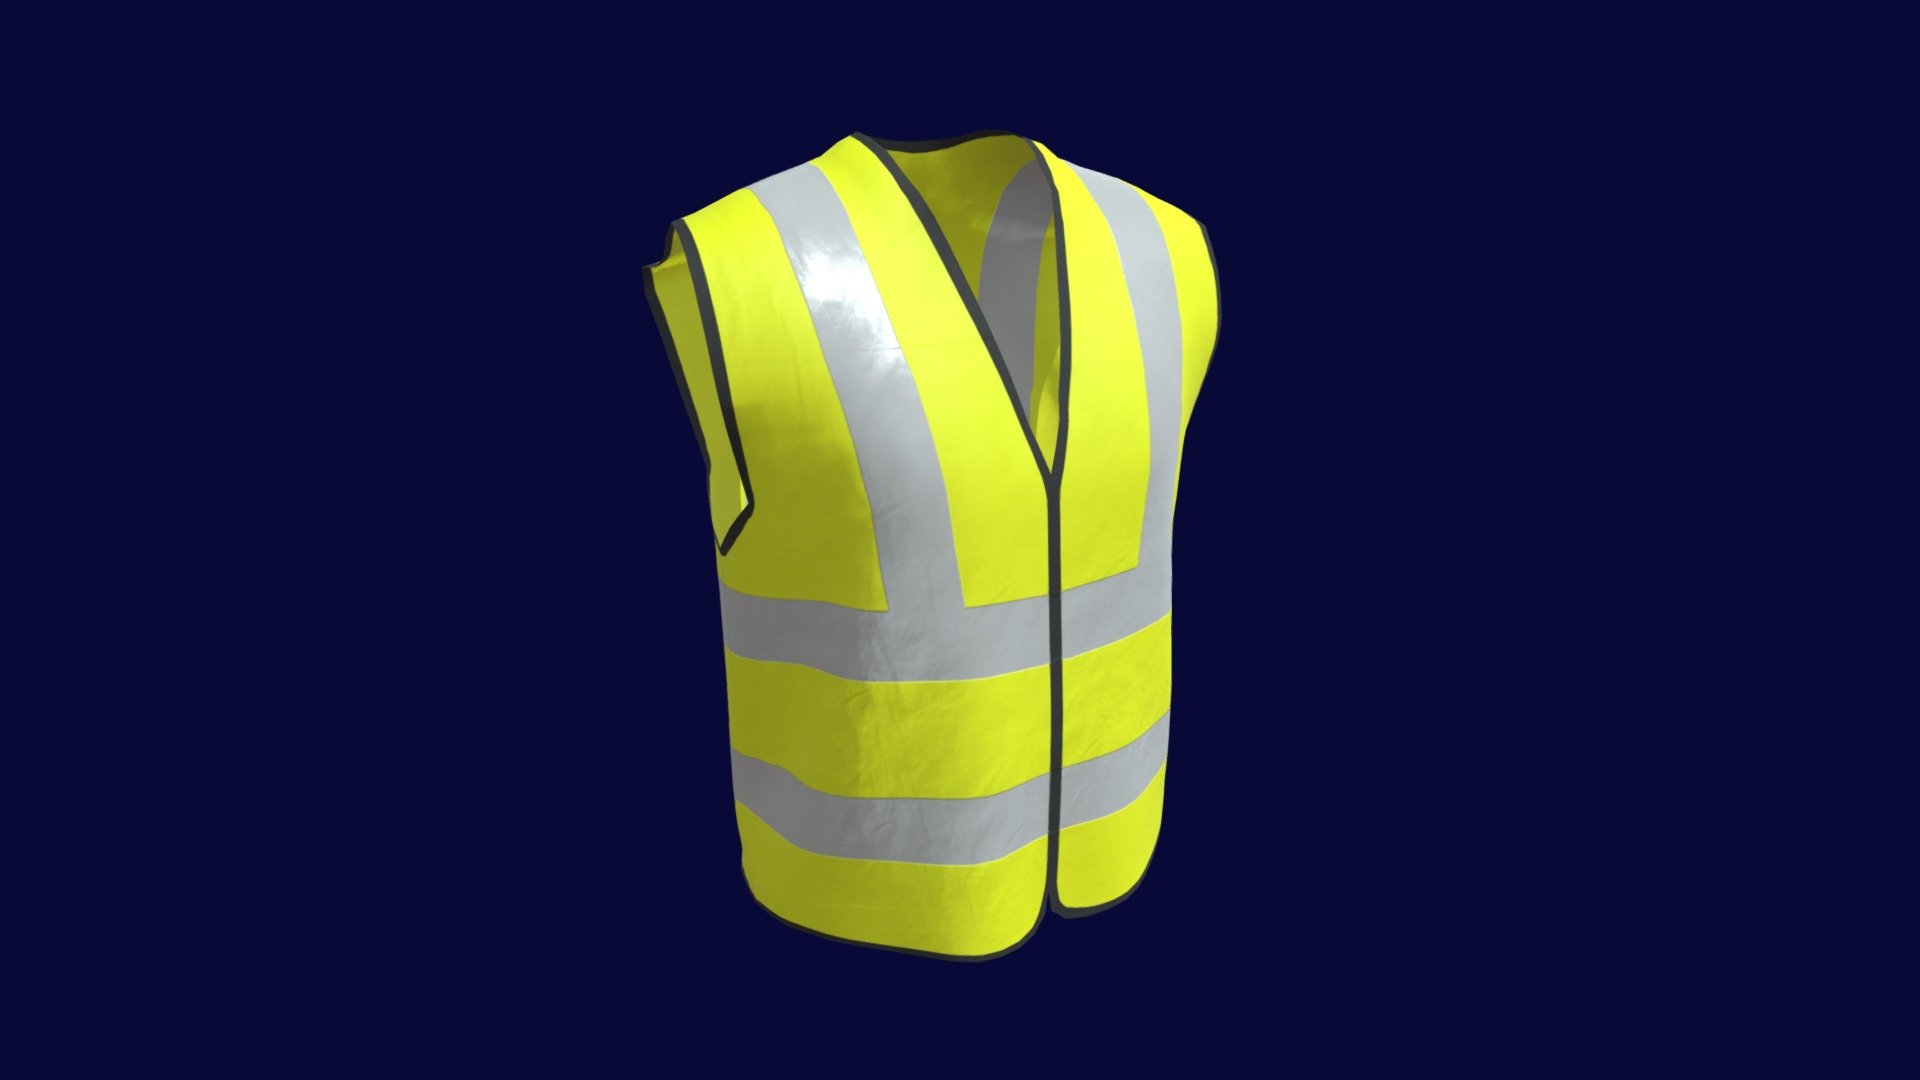 Just a simple high-visibility [construction] vest I made since there aren't any free ones I could use for basic archviz. Not intended for close-ups.

Uploaded in the GLTF format 3d model